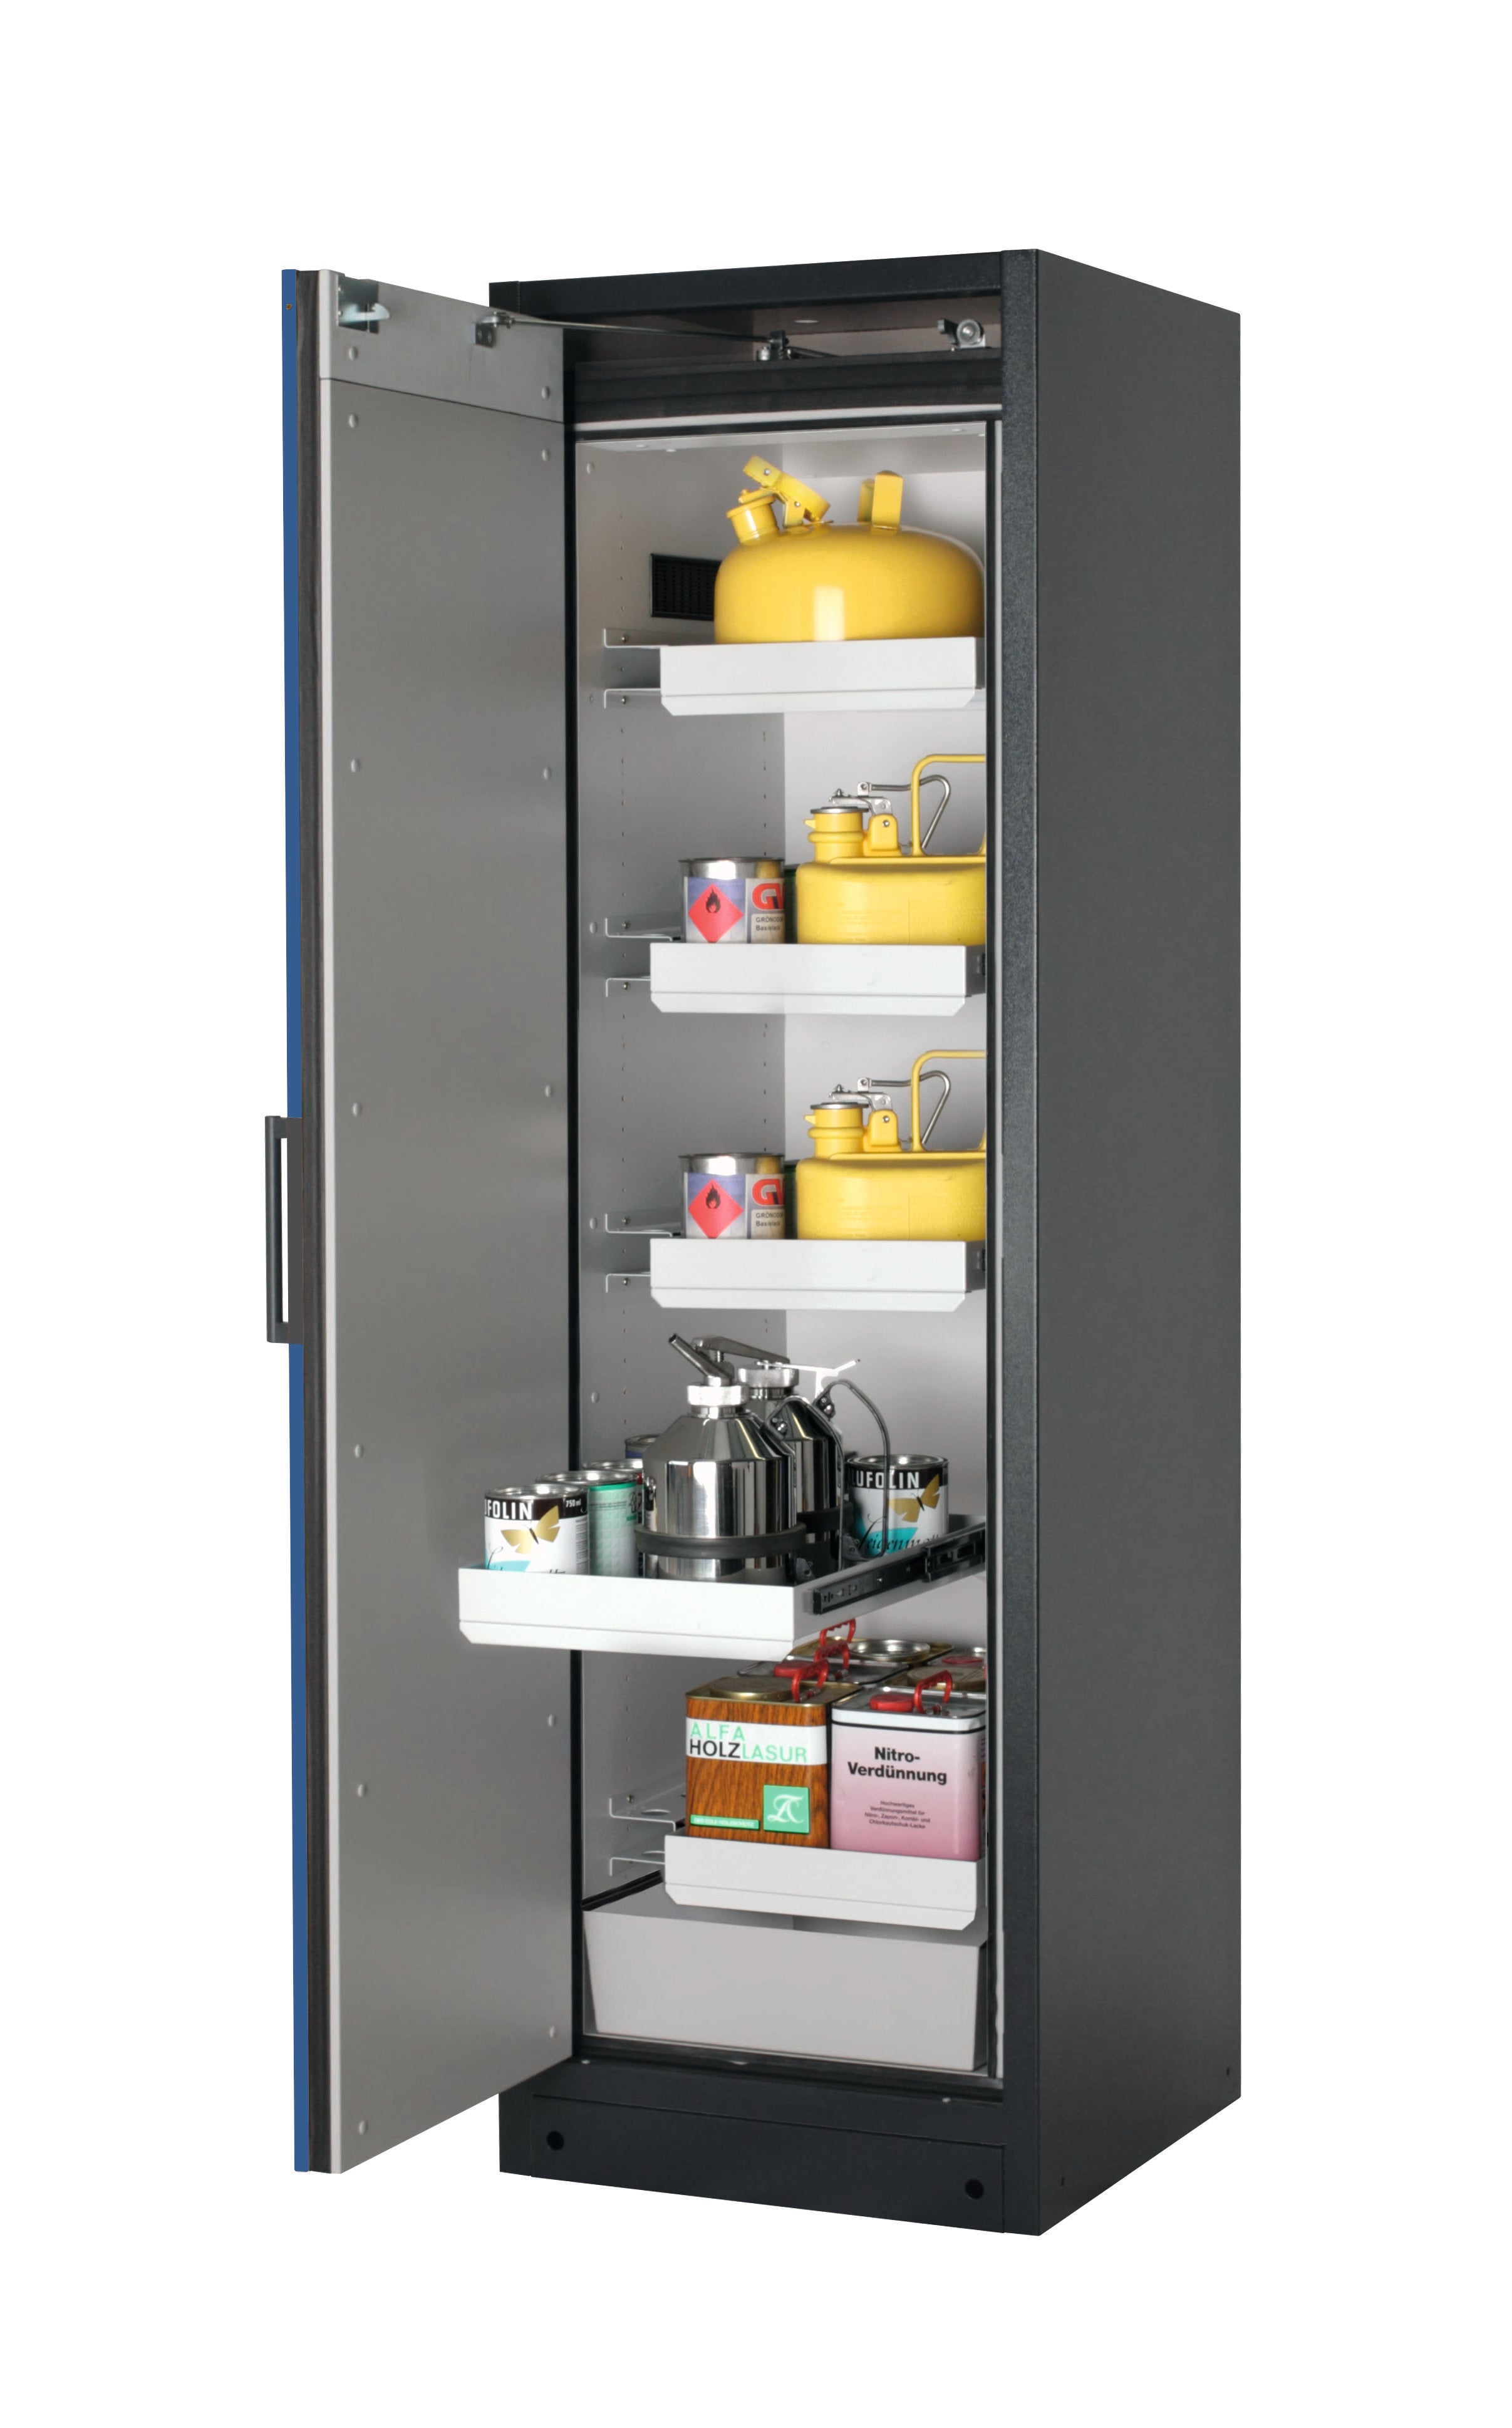 Type 90 safety storage cabinet Q-CLASSIC-90 model Q90.195.060 in gentian blue RAL 5010 with 4x drawer (standard) (sheet steel),